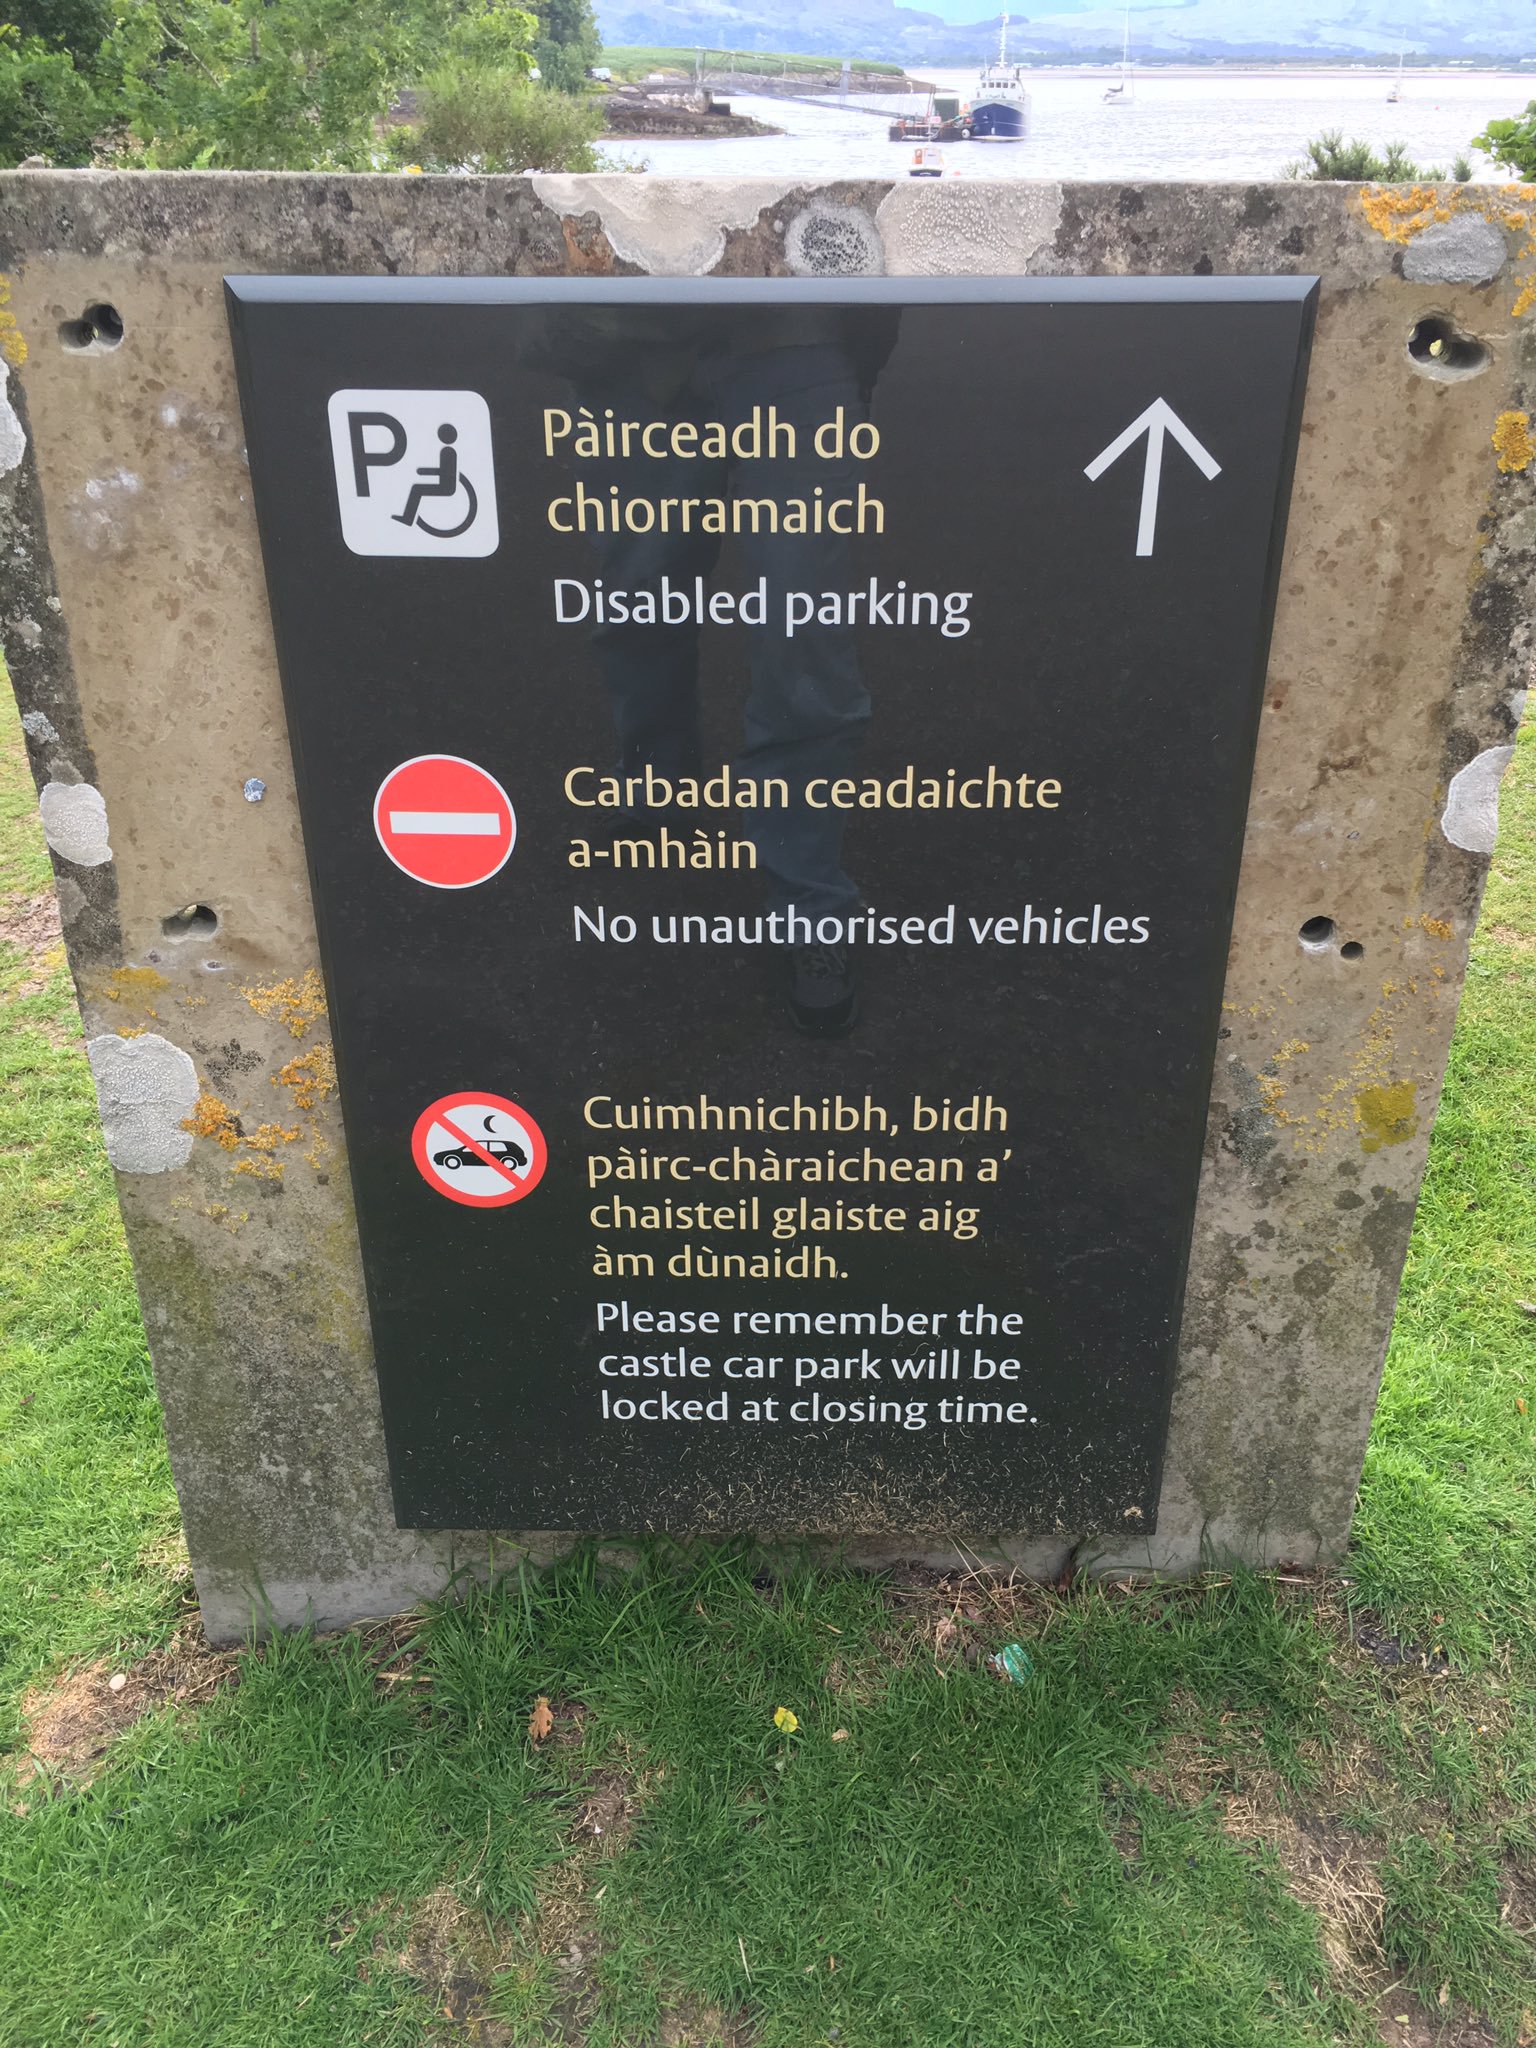 I respect the preservation of Scots Gaelic, but they sure do print a lot of signs in a language almost no one speaks https://t.co/ADarMbJMg3